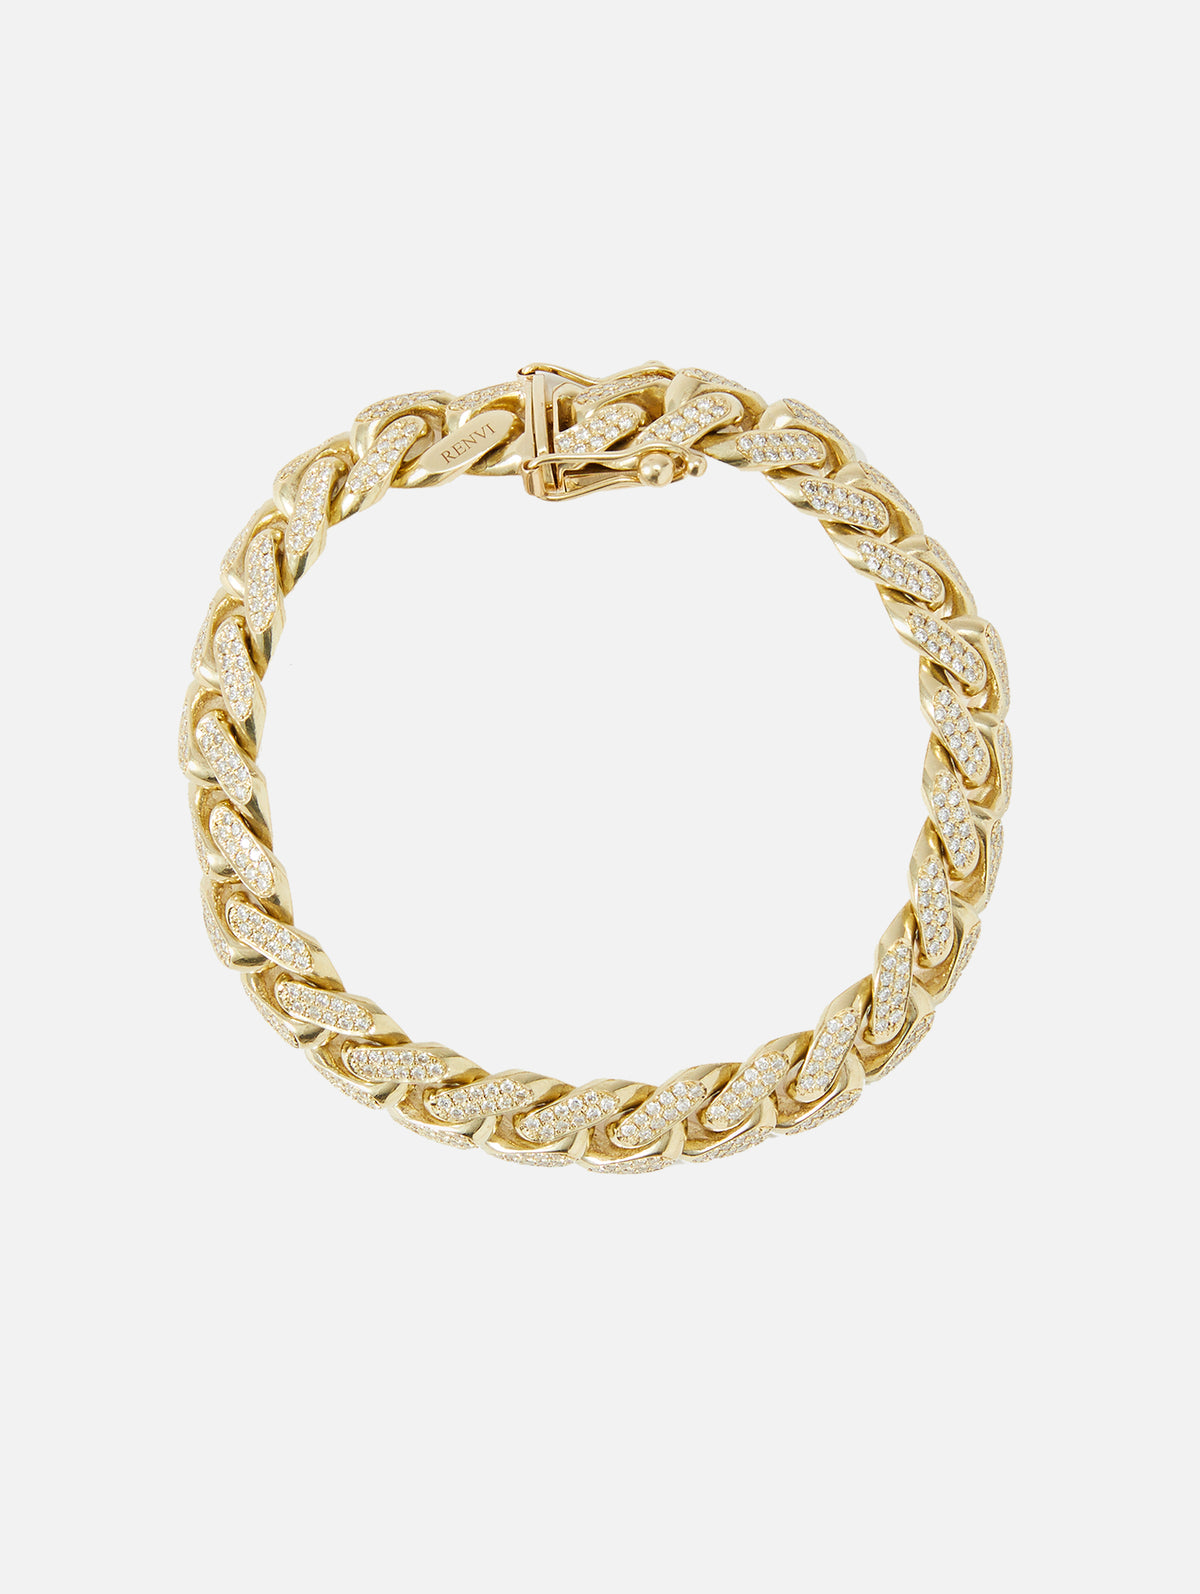 view 3 - YELLOW GOLD